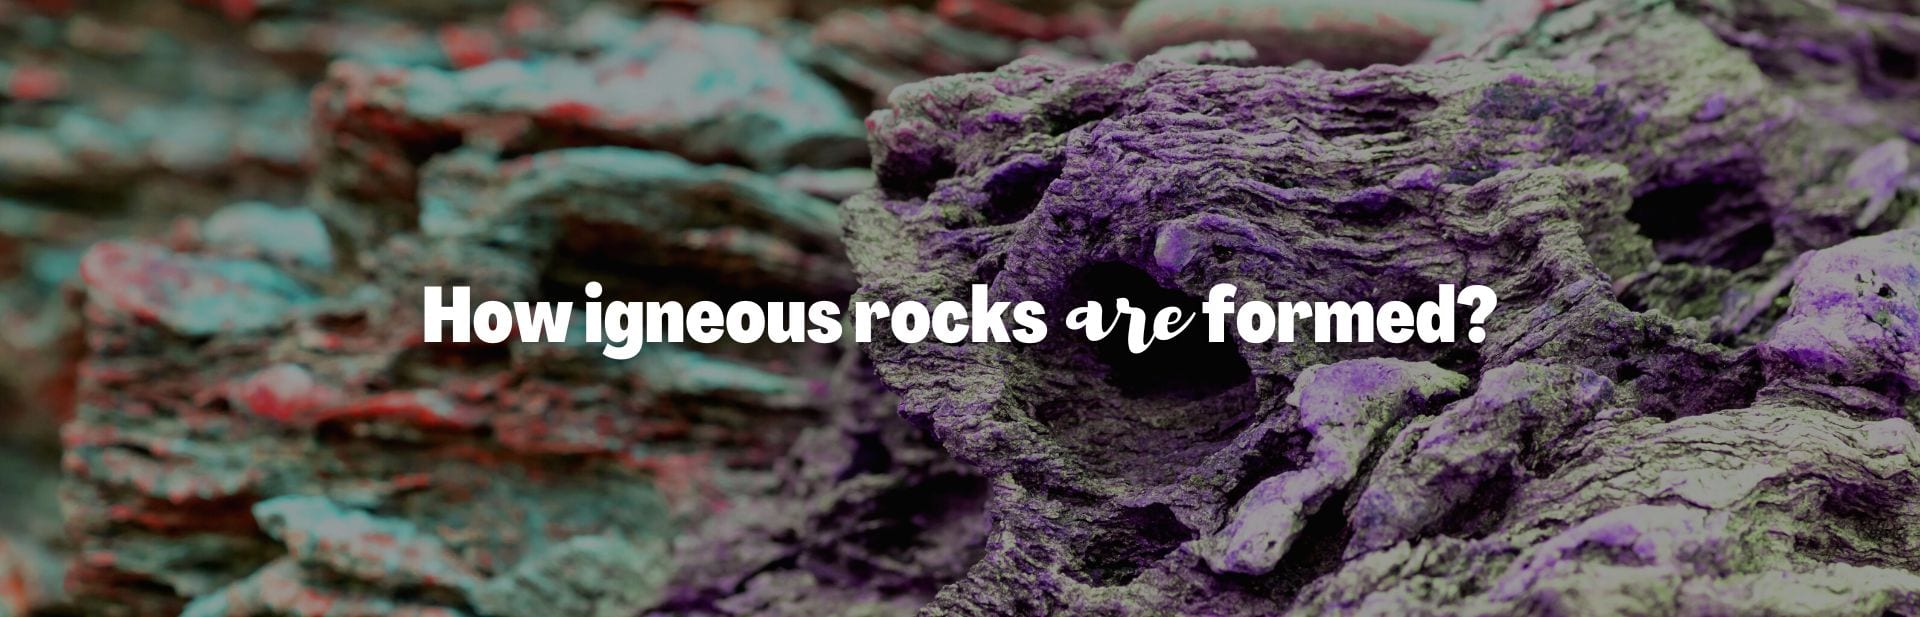 How are Igneous Rocks Formed? Unravel the Fiery Origins of Earth’s Building Blocks